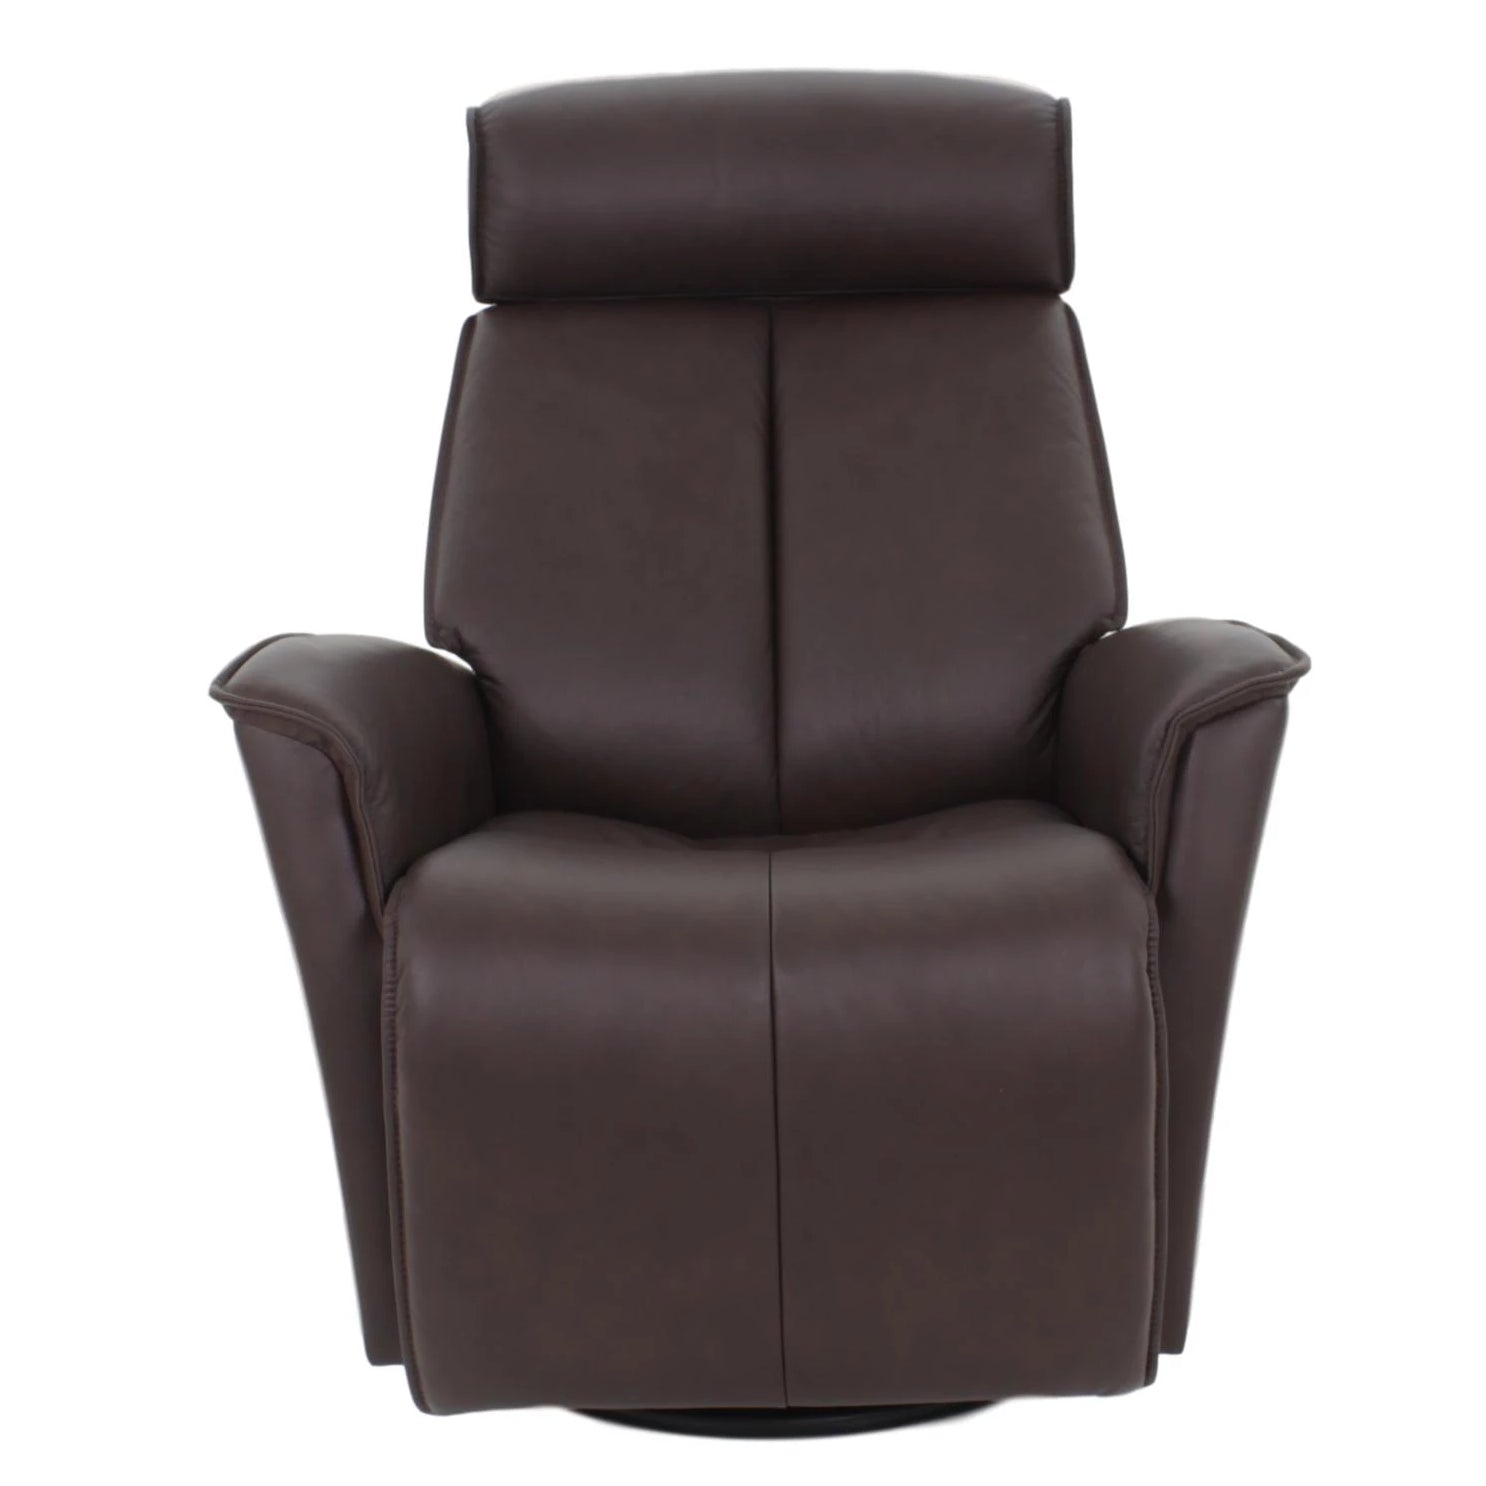 the Fjords  contemporary Venice Large living room reclining leather recliner is available in Edmonton at McElherans Furniture + Design